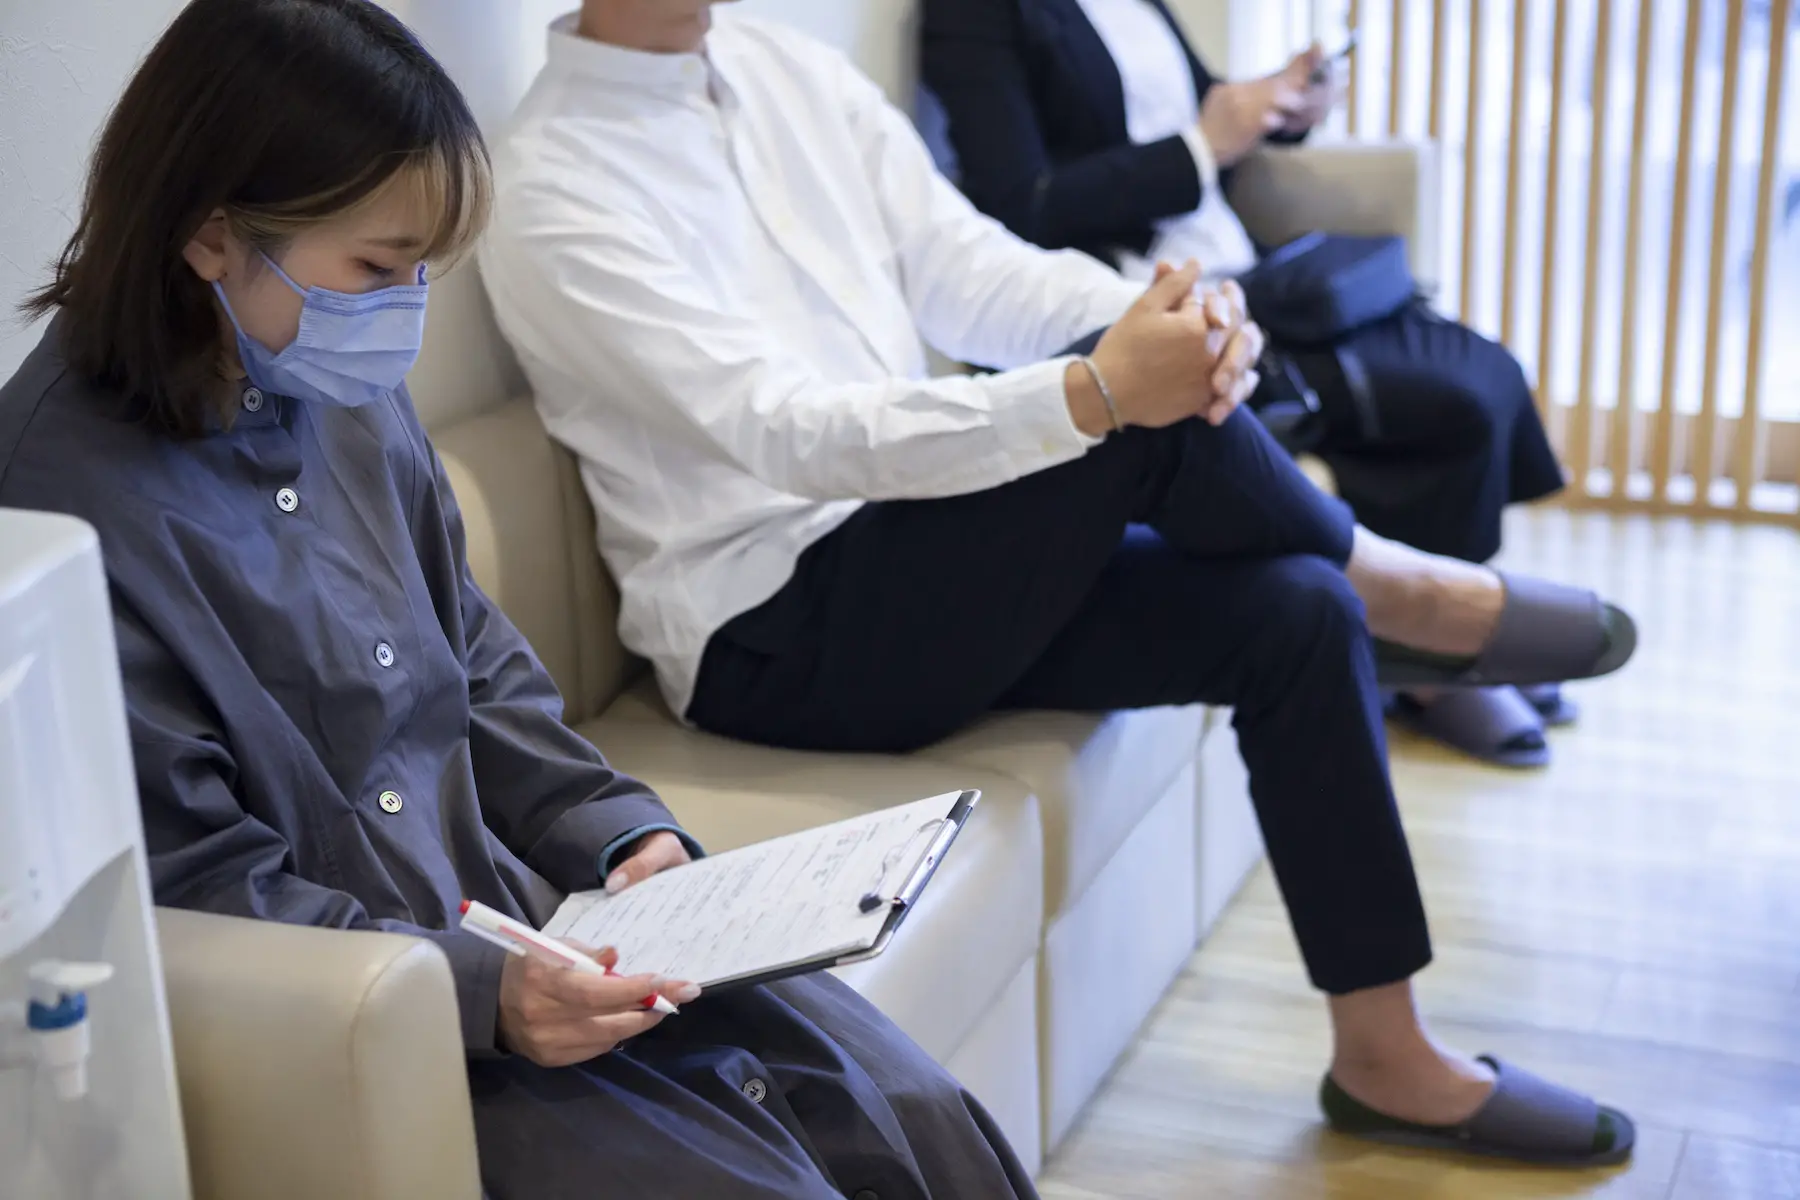 A patient waits to be seen at a clinic while wearing a mask and filling out medical forms